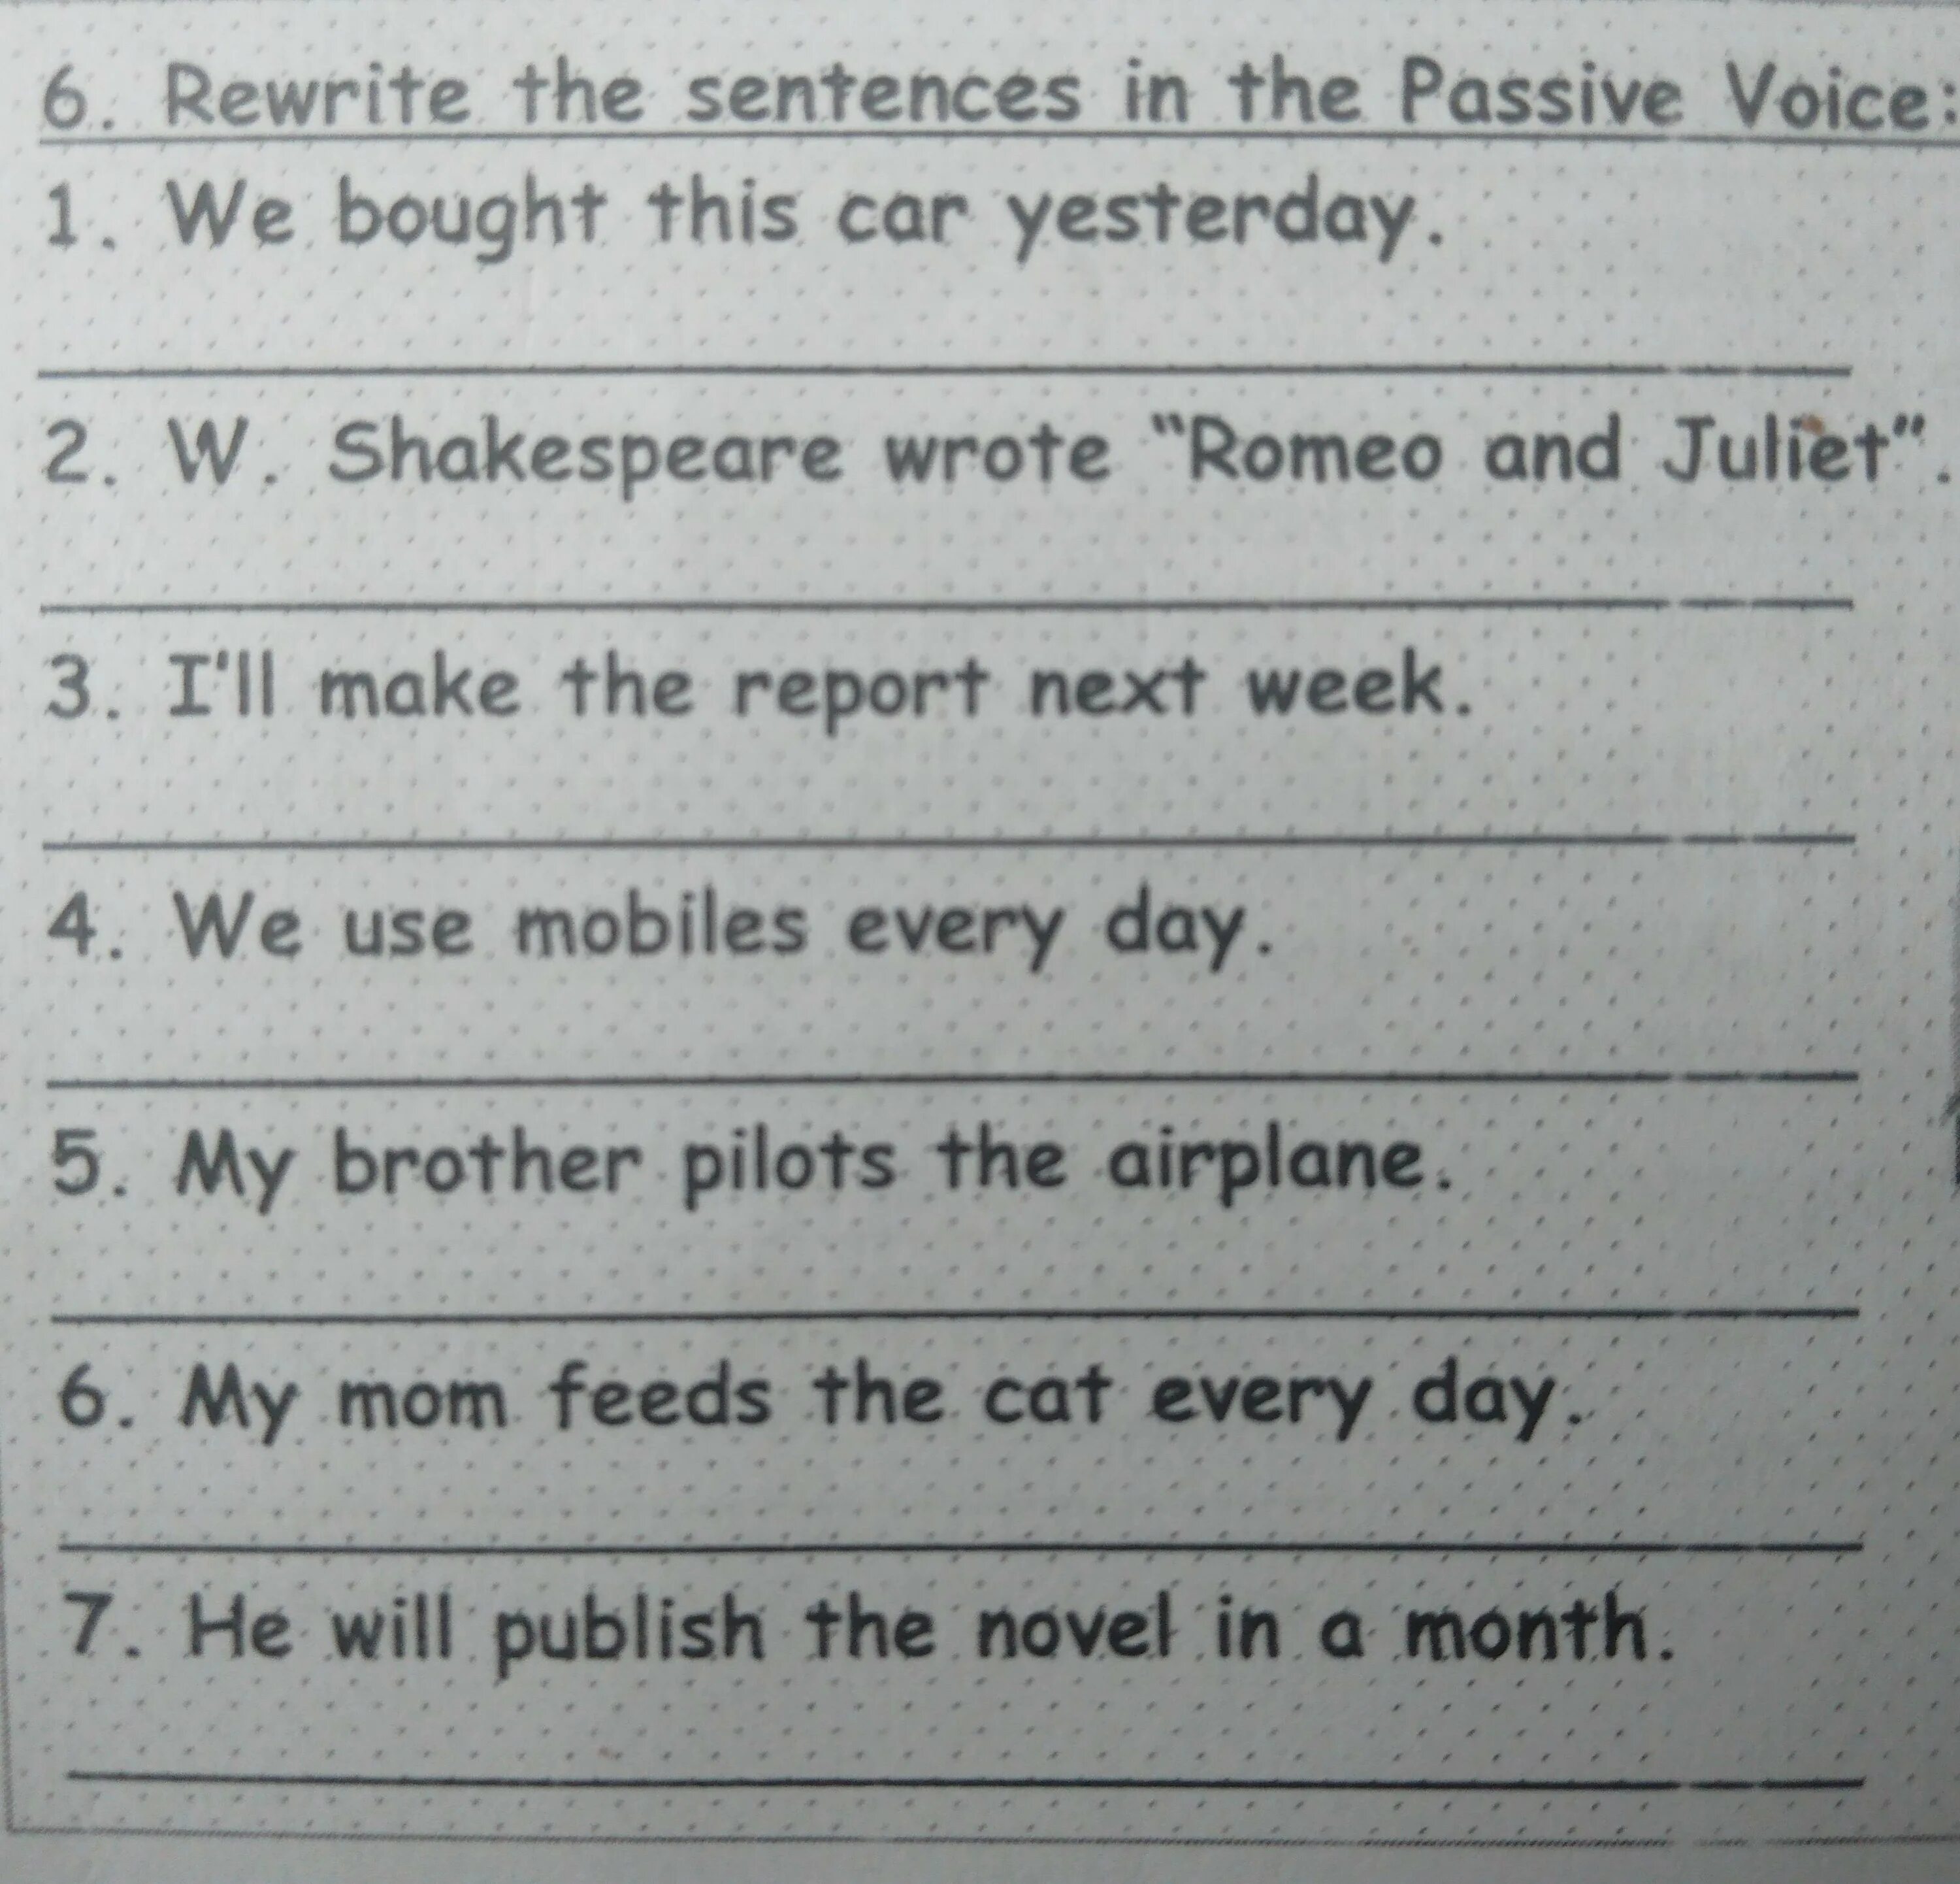 Rewrite the sentences in the. Rewrite the sentences in the Passive. Passive Voice yesterday. Passive Voice Rewrite the sentences in Passive. Write sentences in the present passive